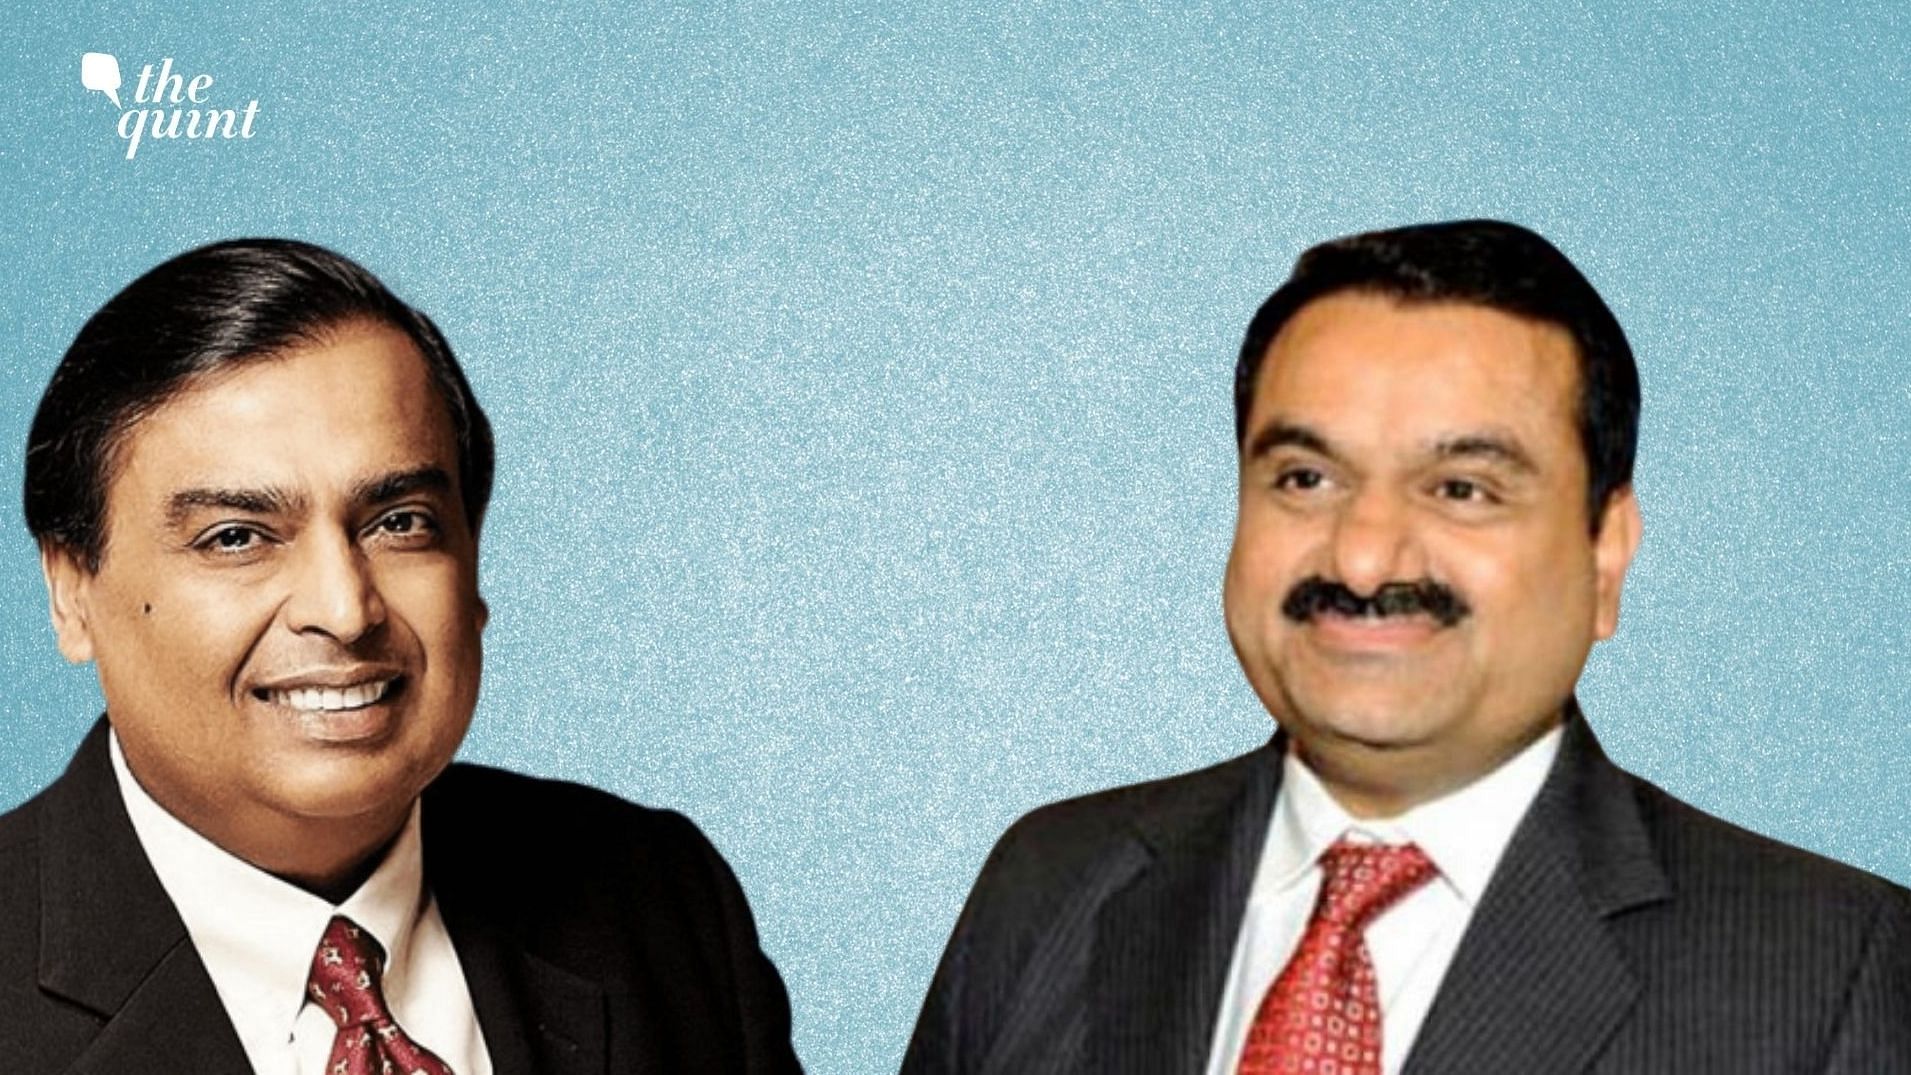 India is home to the third-highest number of billionaires in the world, as per a Forbes magazine list, which names with the likes of Reliance Industries Chairman Mukesh Ambani and Adani Group Chairman Gautam Adani.